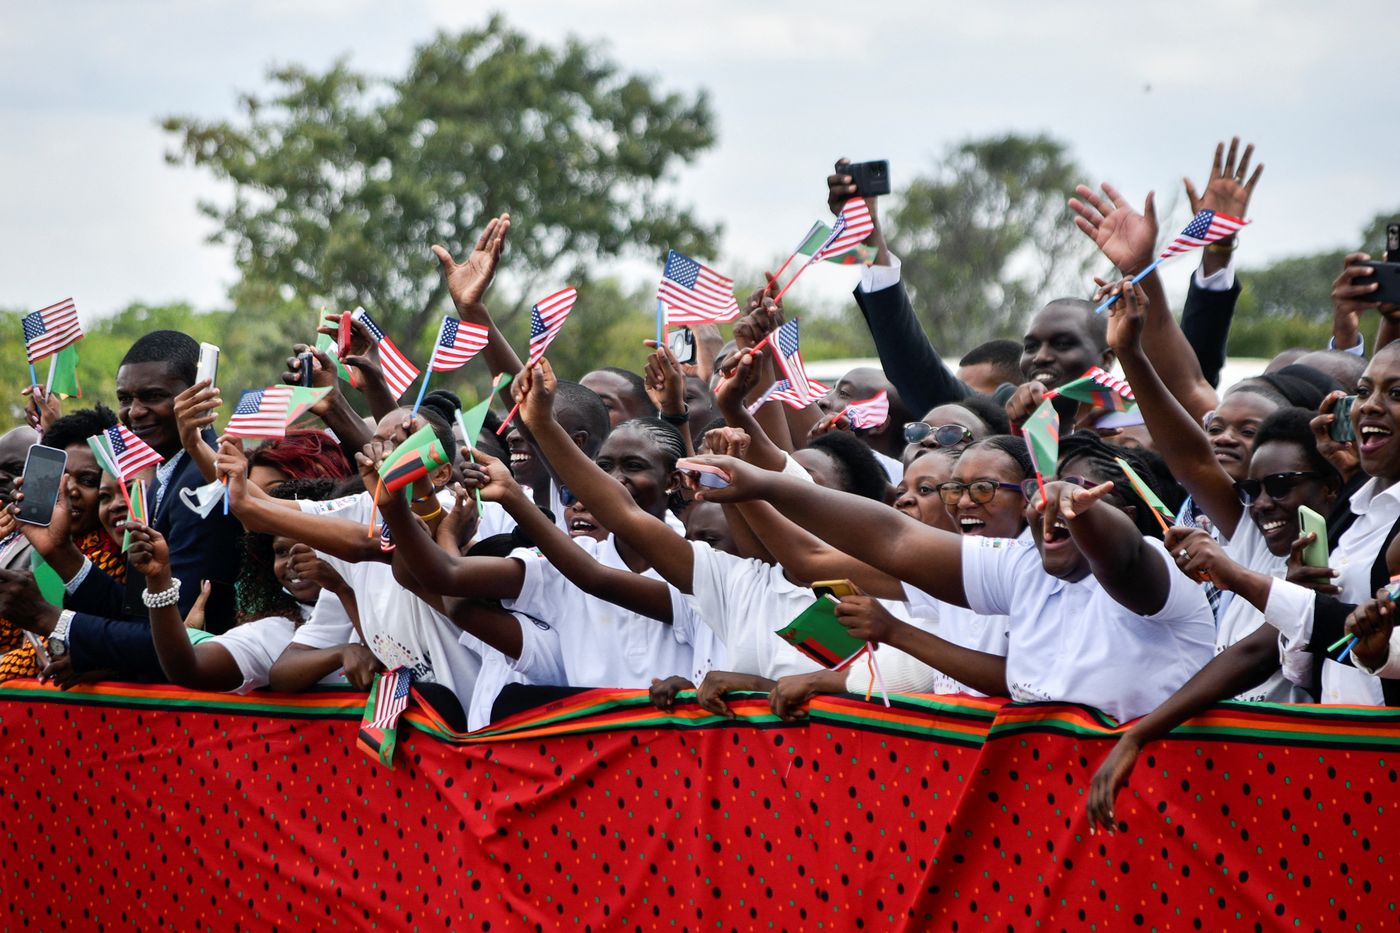 Zambia, 2023: People cheer and wave American flags during the visit of U.S. Vice President Kamala Harris in Lusaka.